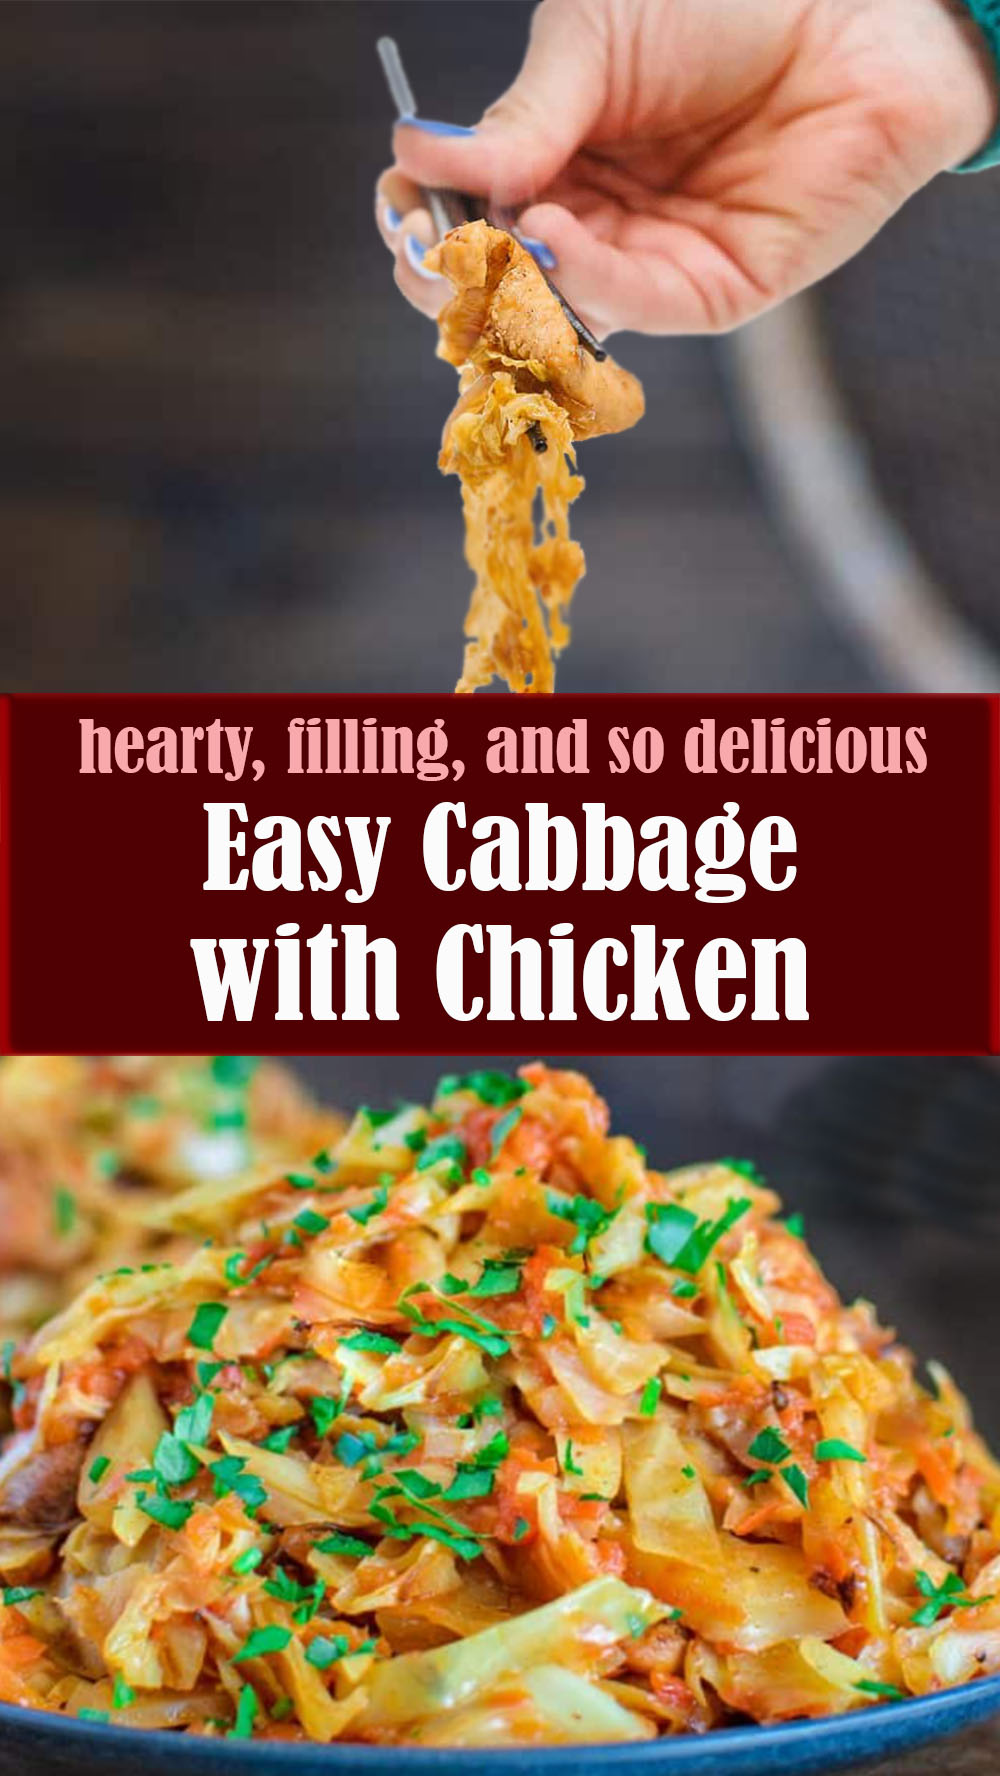 Easy Cabbage with Chicken